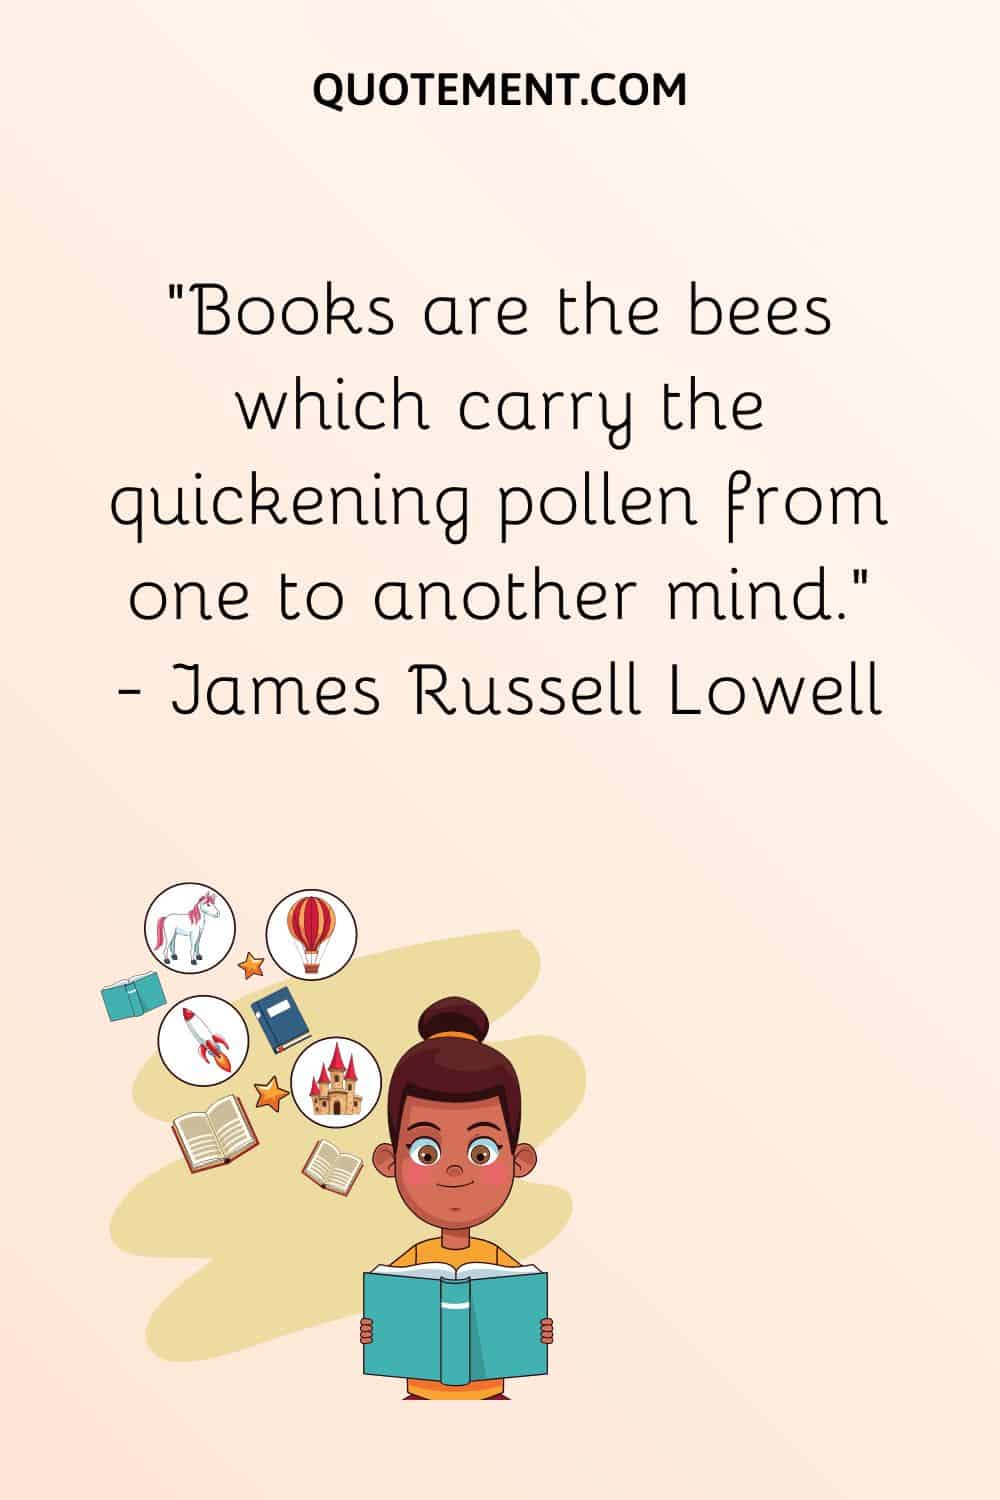 “Books are the bees which carry the quickening pollen from one to another mind.” — James Russell Lowell